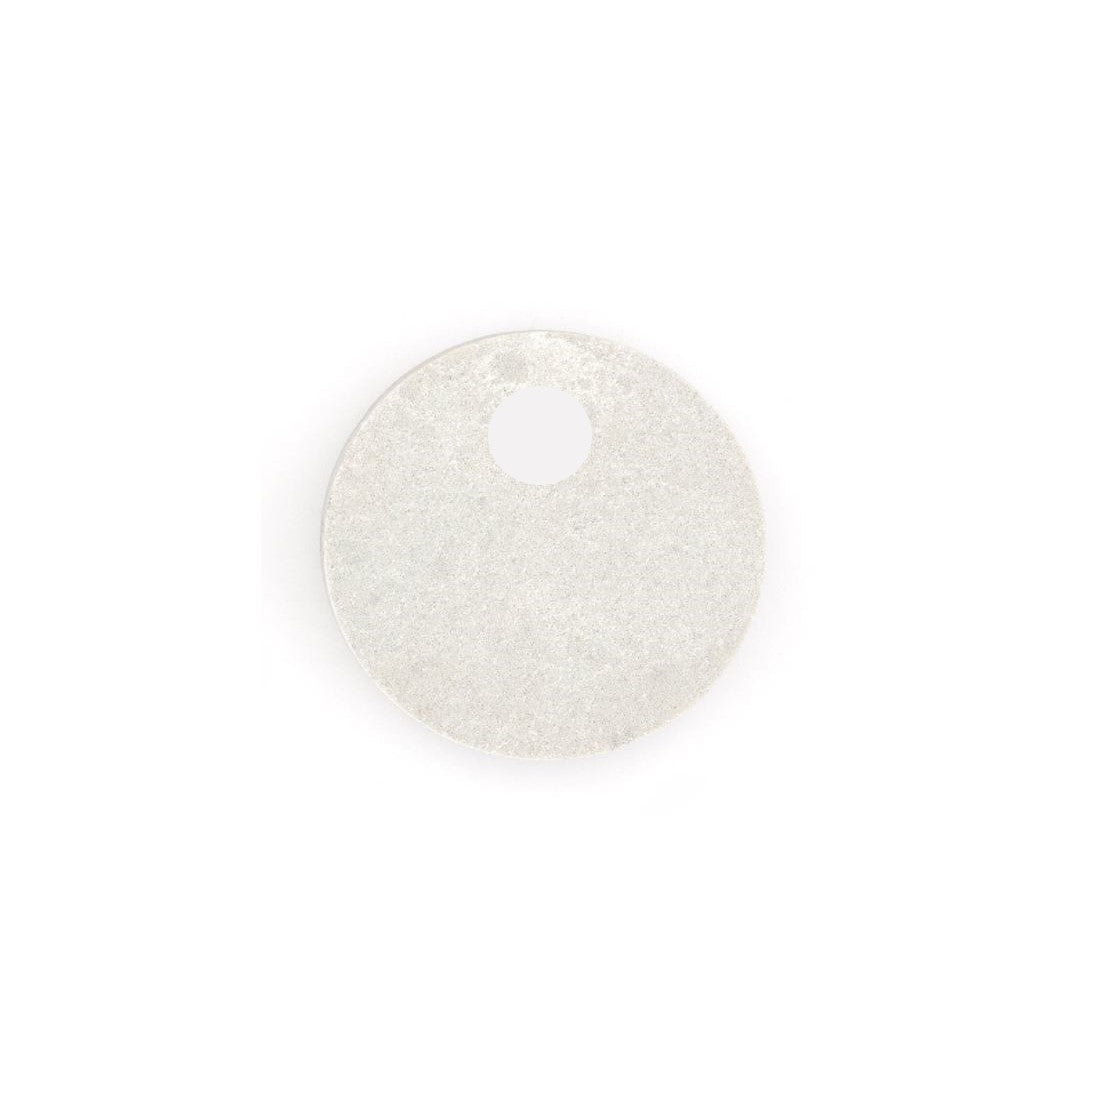 Candle holder in Caesarstone Airy Concrete™ created by Aureliia Collection. A round marble candle holder in appearance, the quartz candle holder is more durable comparatively, making it the perfect home decor gift. Great interior design product and housewarming gift idea. 